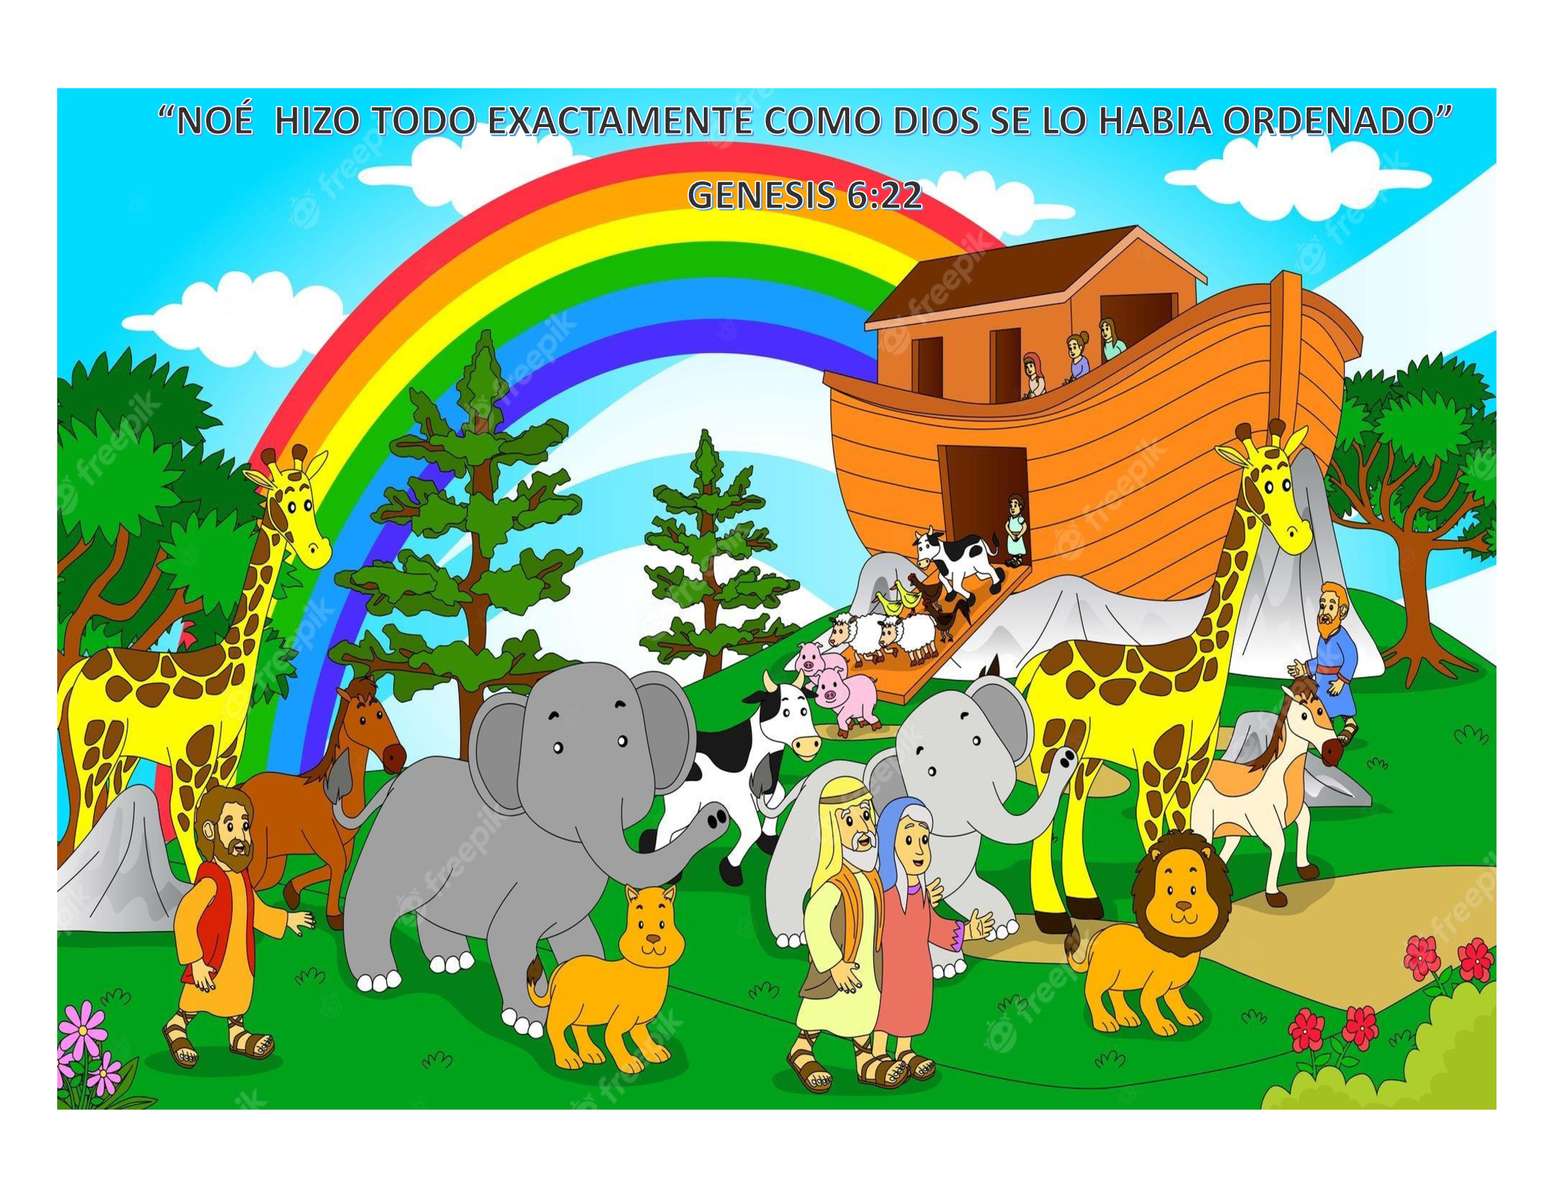 Arka Noego puzzle online